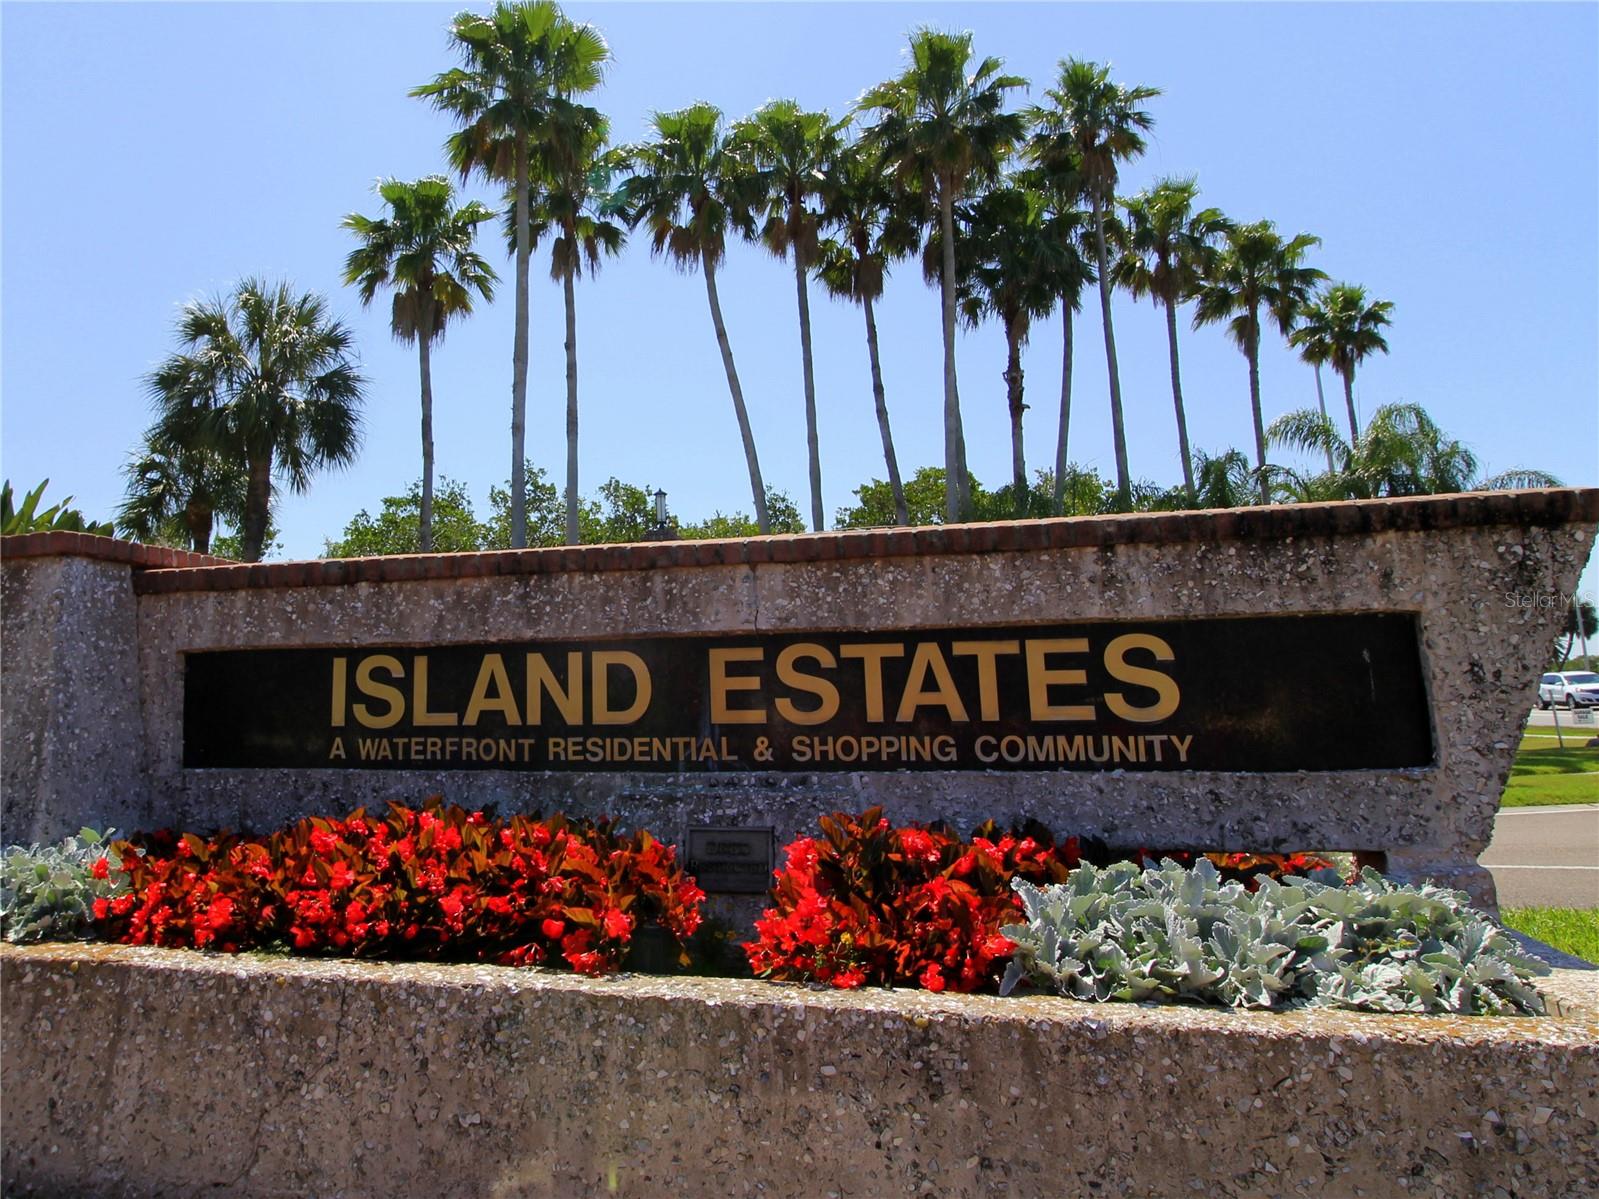 WELCOME TO ISLAND ESTATES